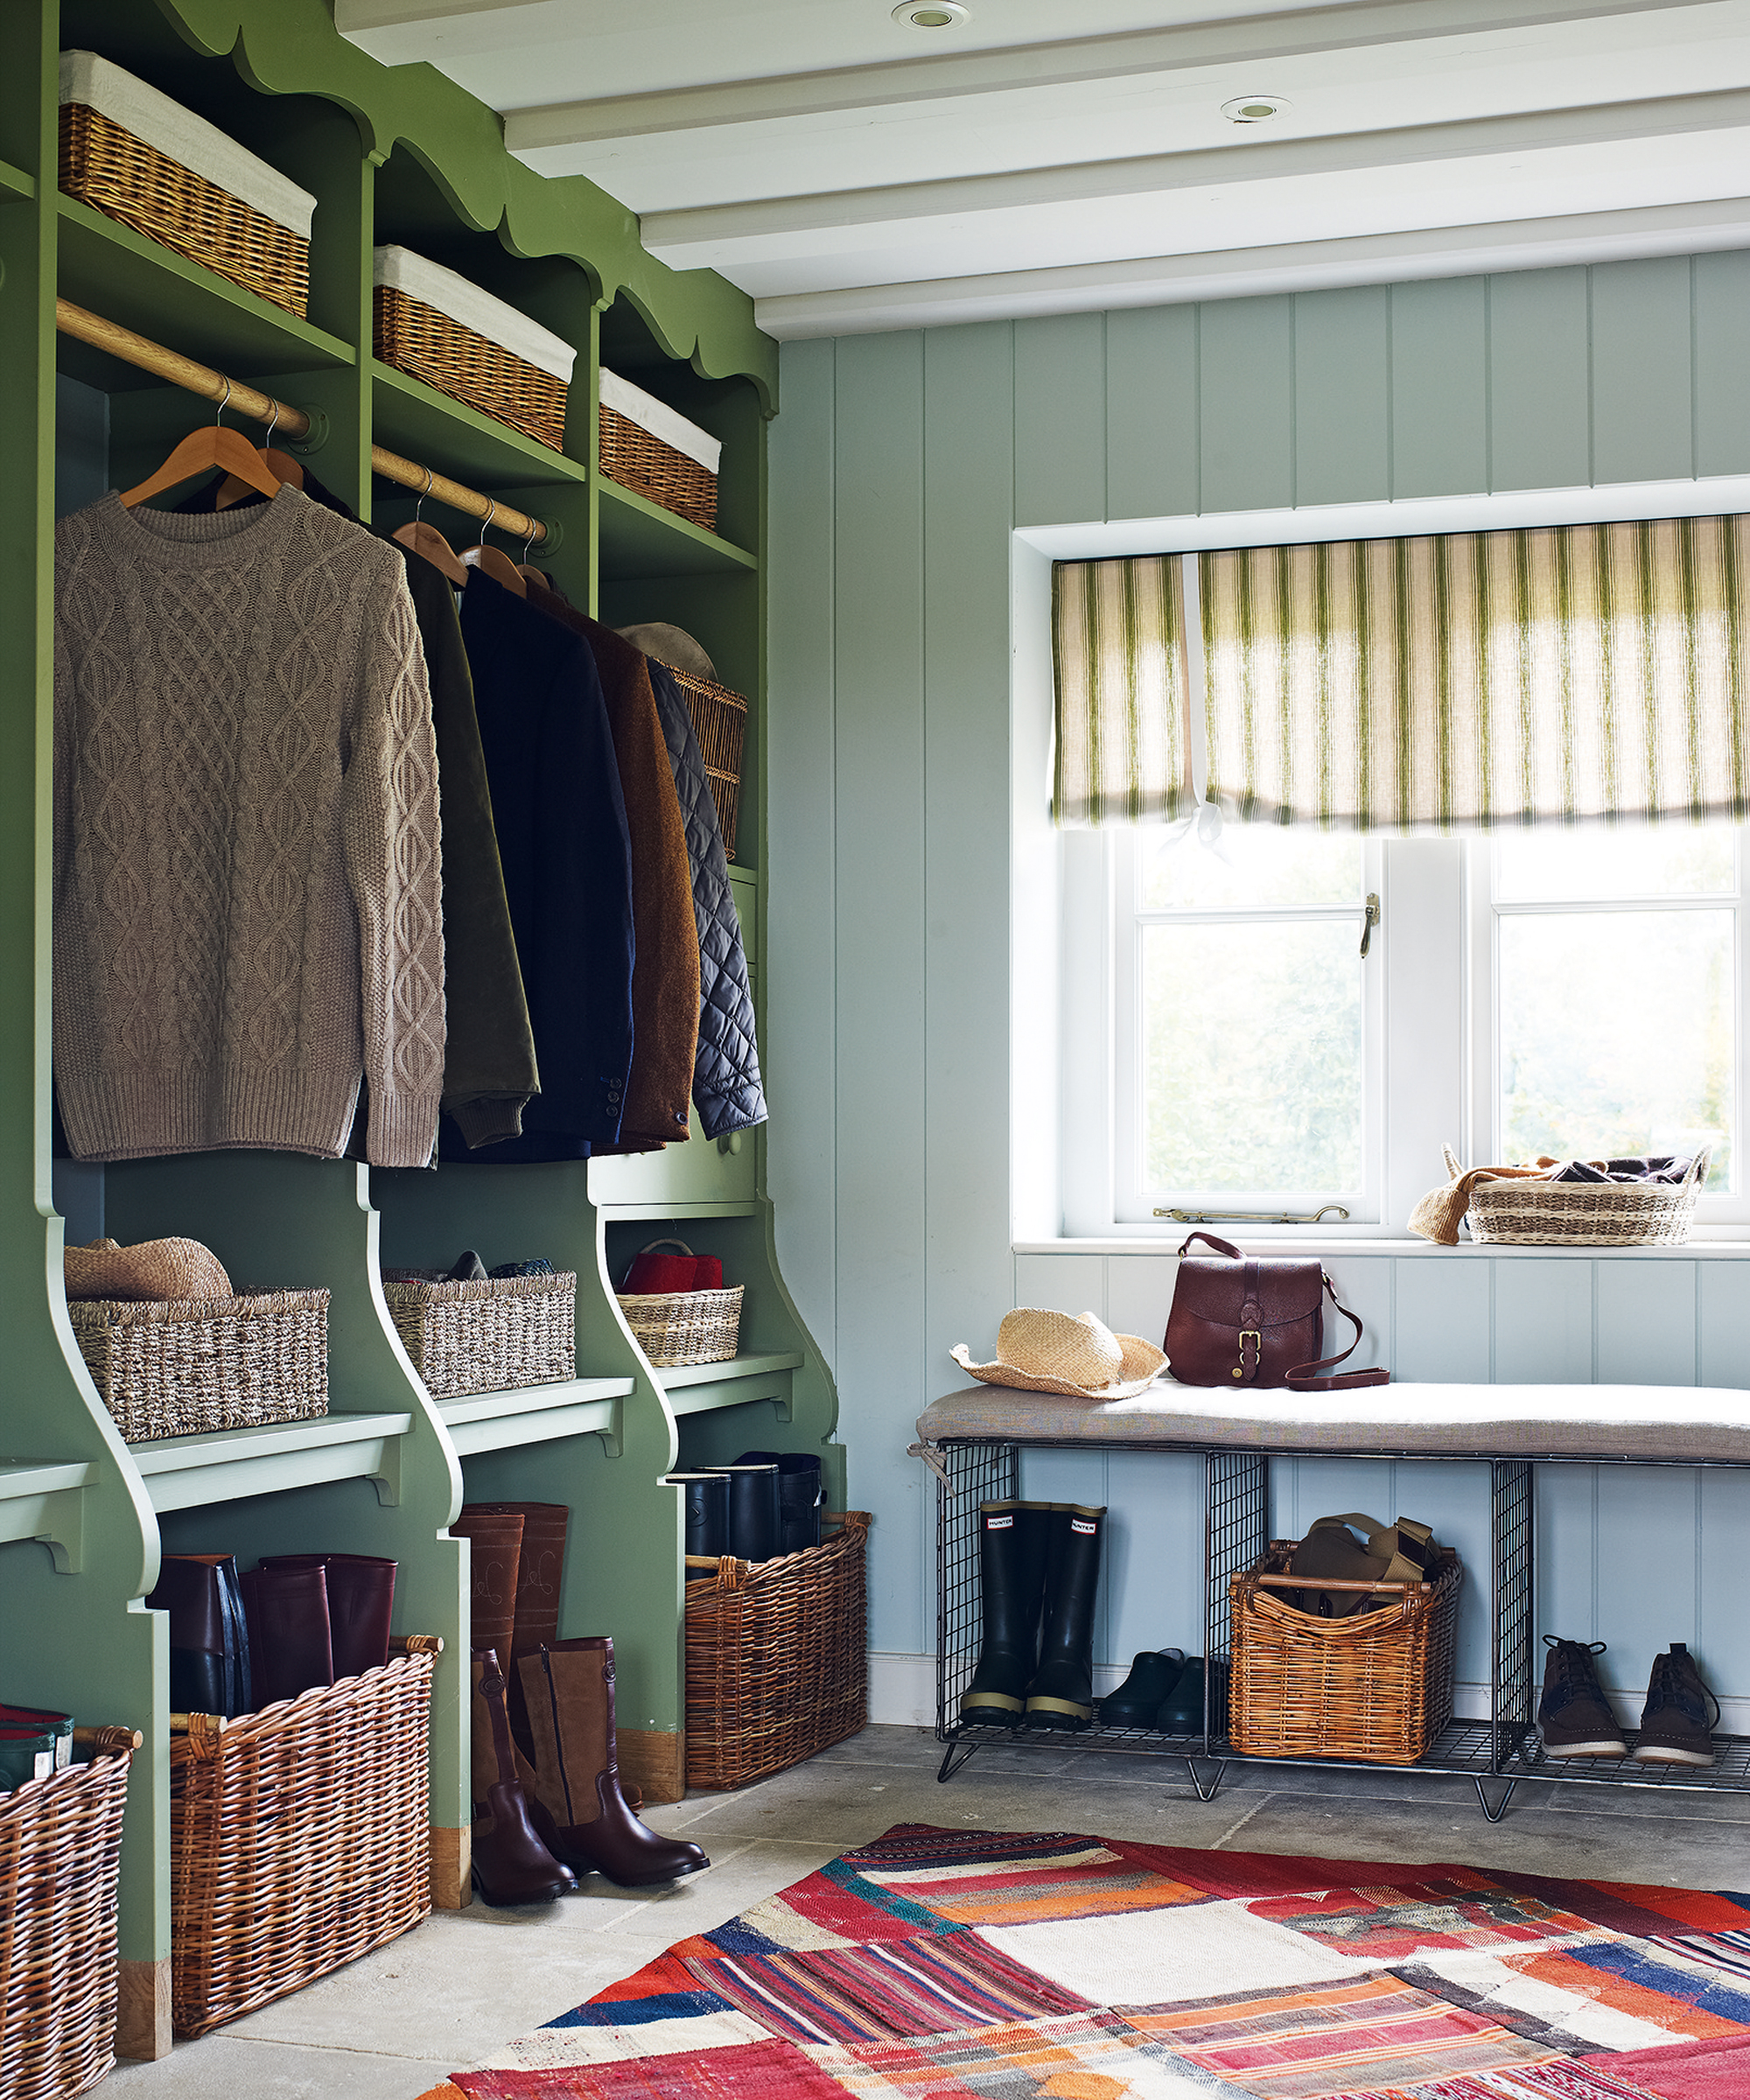 A mudroom with a green open shelving unit divided into personal sections, and woven baskets for boots